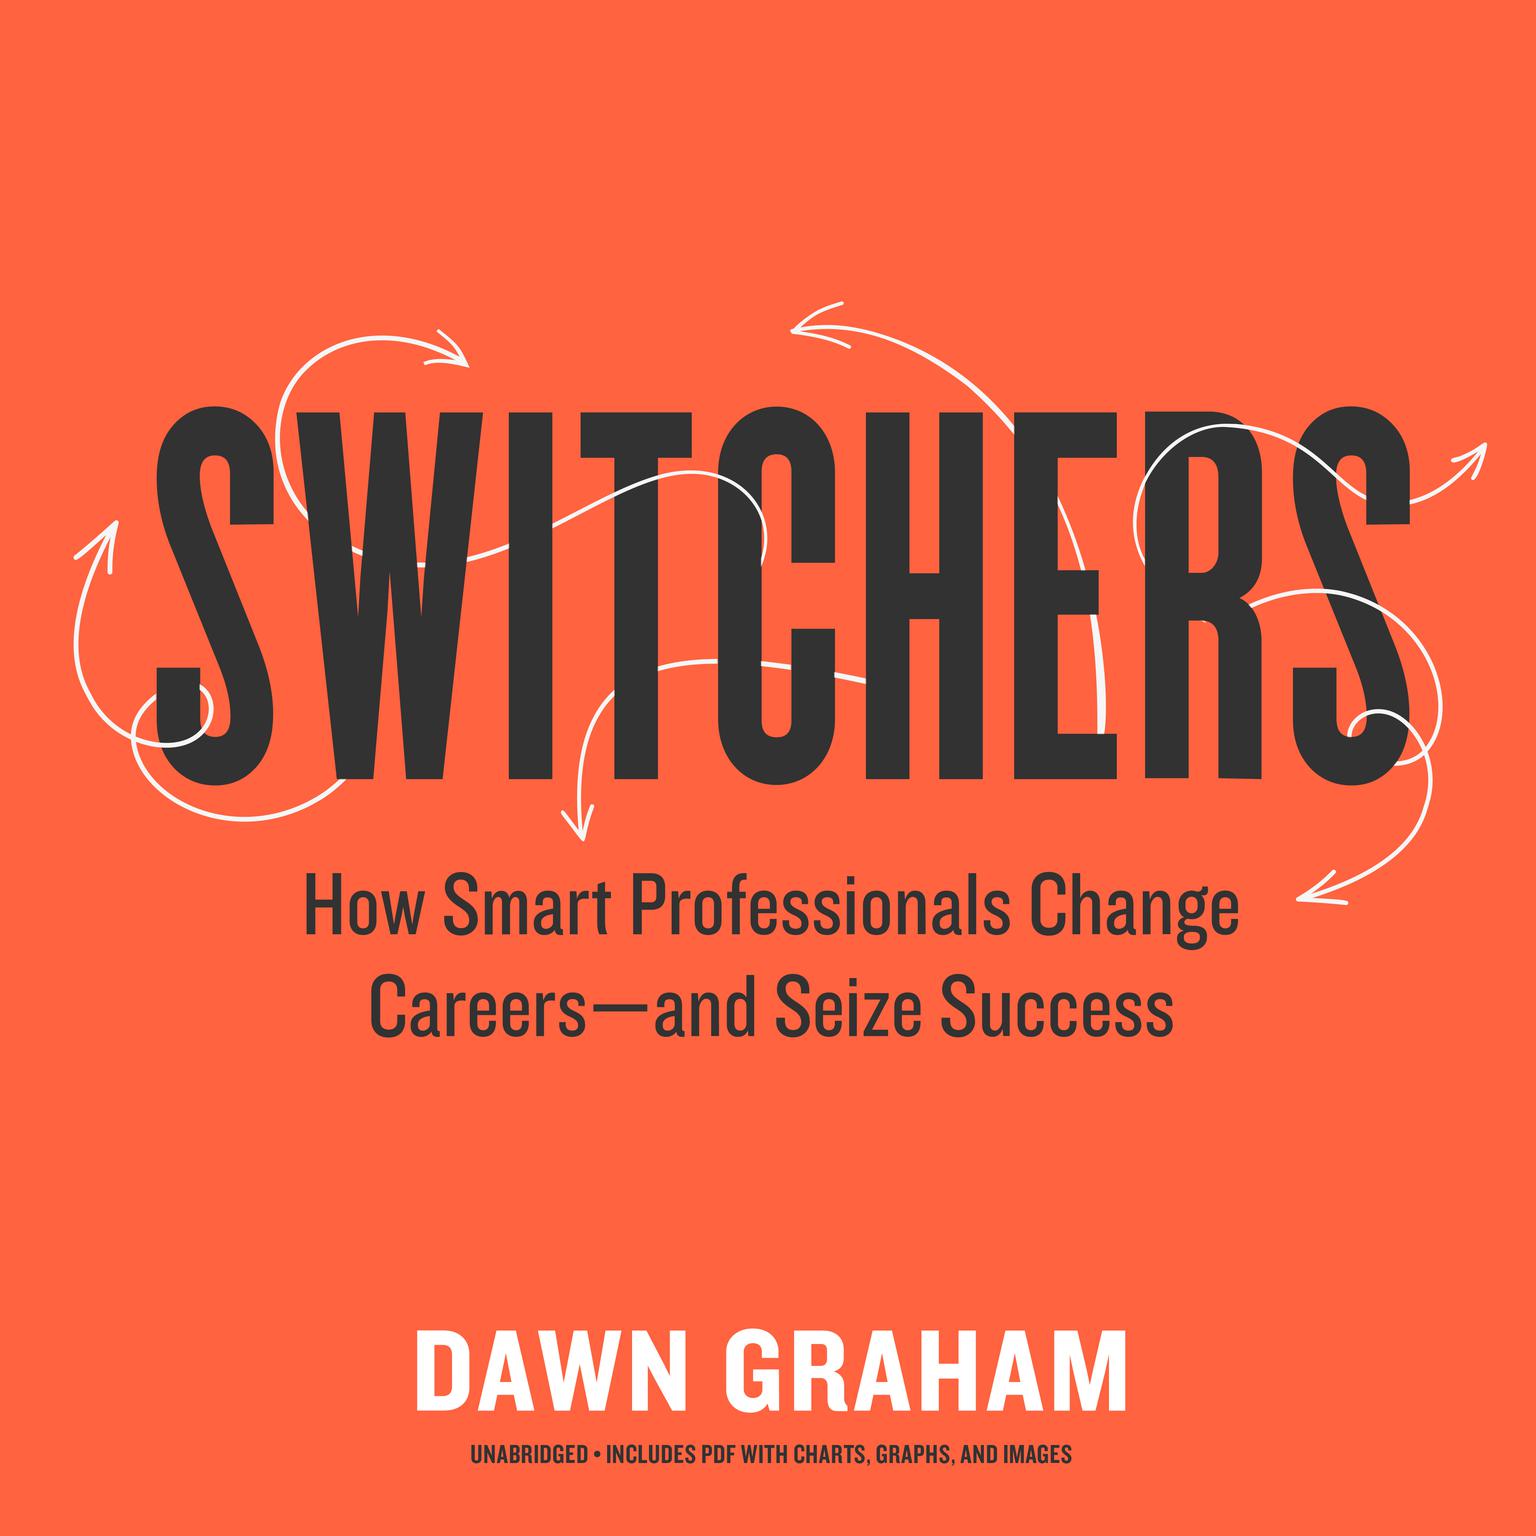 Switchers: How Smart Professionals Change Careers—and Seize Success Audiobook, by Dawn Graham